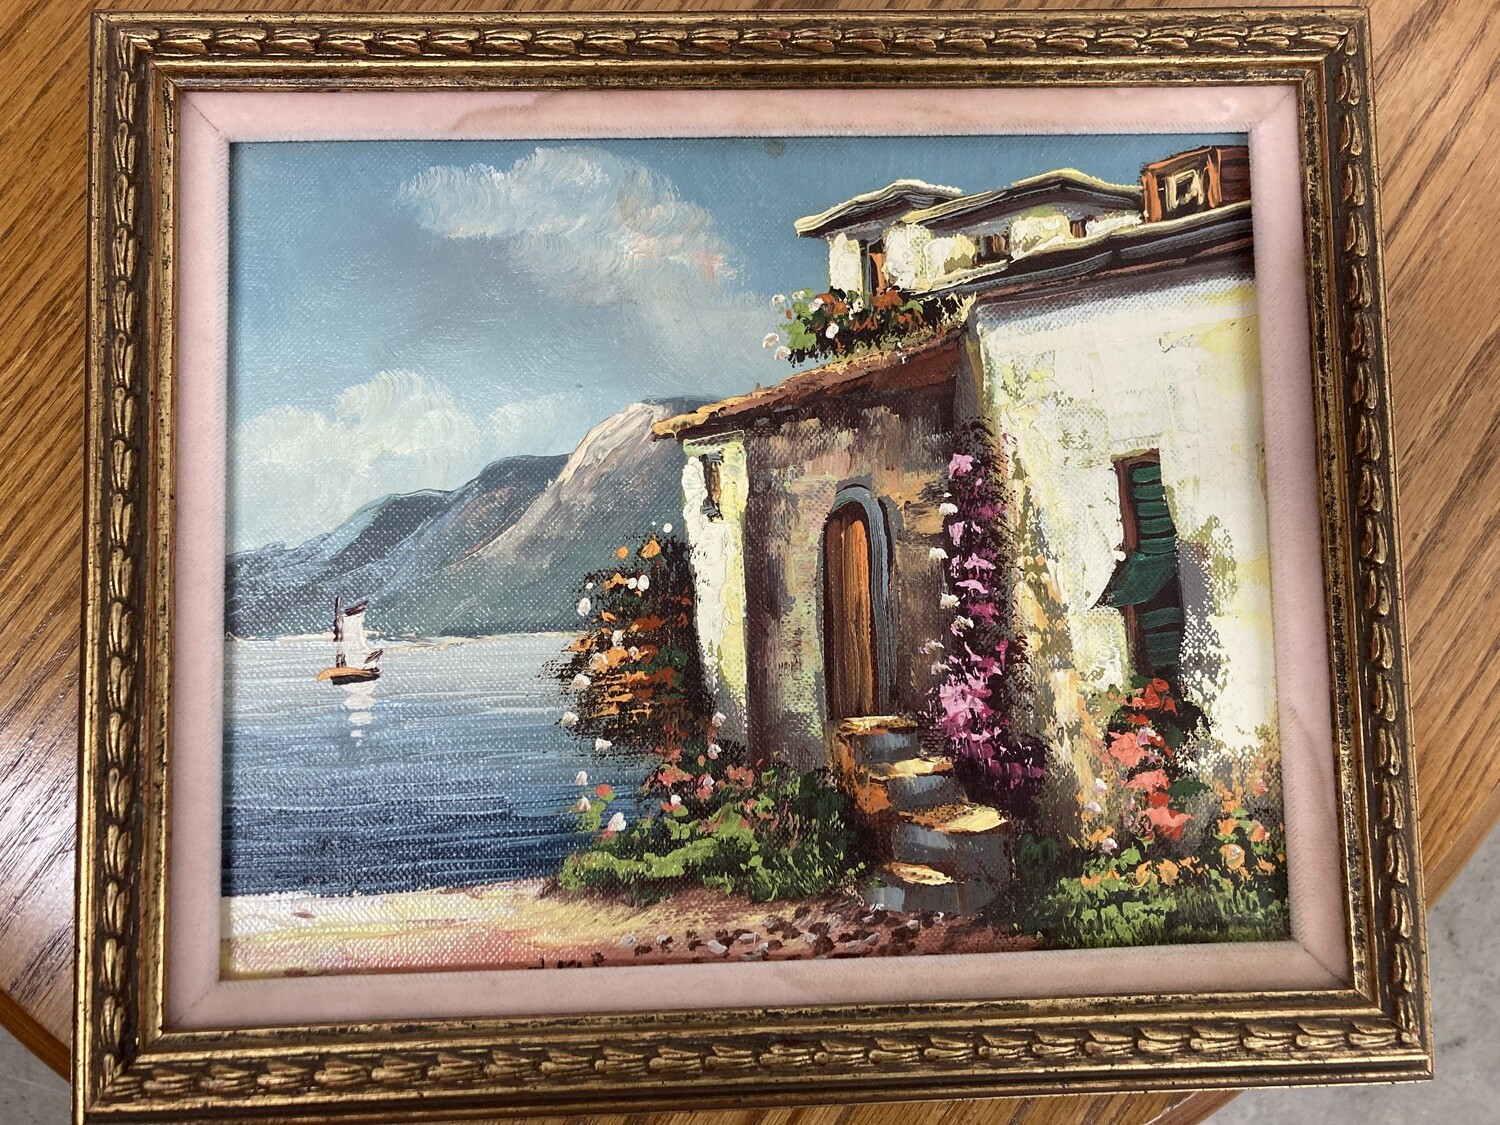 Framed art: House on Lake #2314 ** 7 mos. to sell - original price??